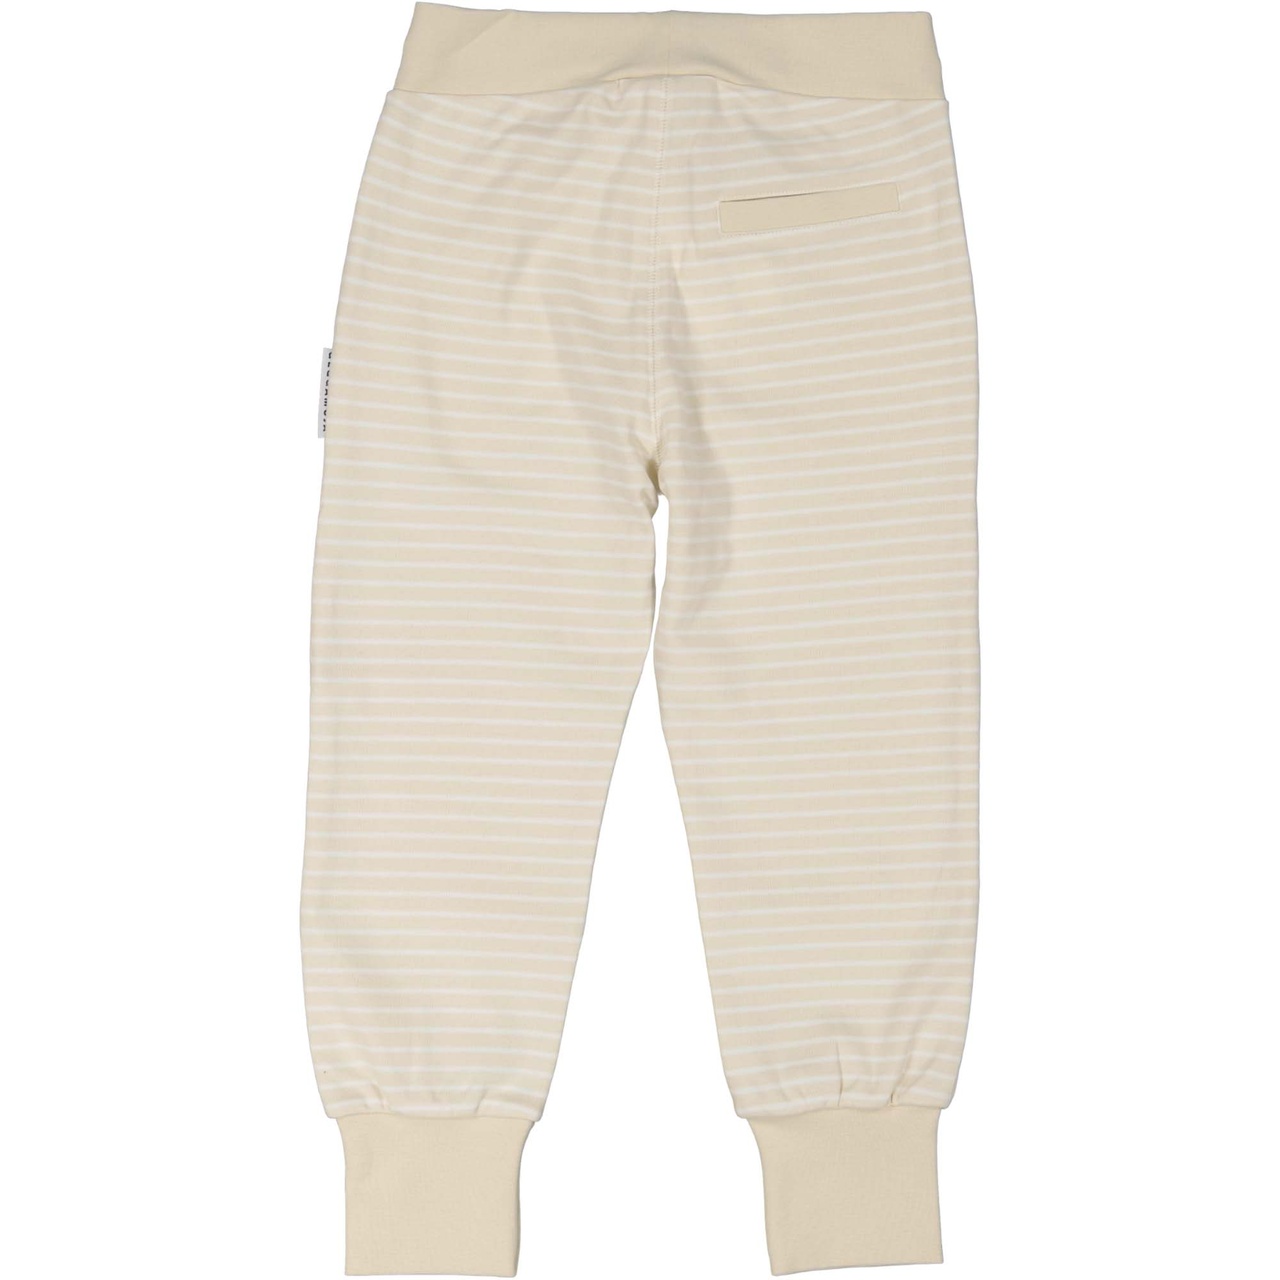 Baby pant Offwhite 62/68